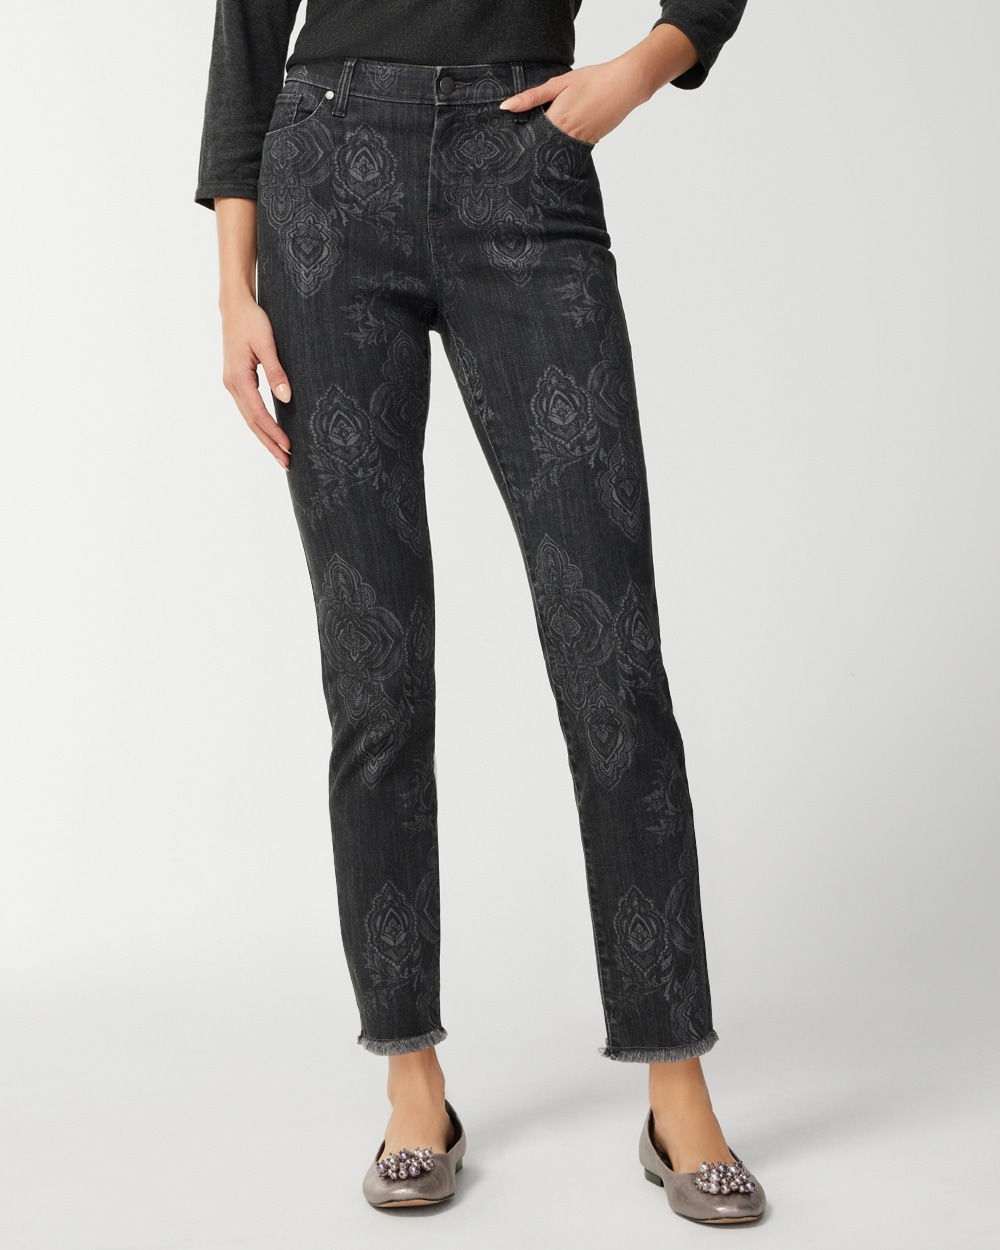 Bicolor Medallion Girlfriend Ankle Jeans - Chico's Off The Rack - Chico's  Outlet